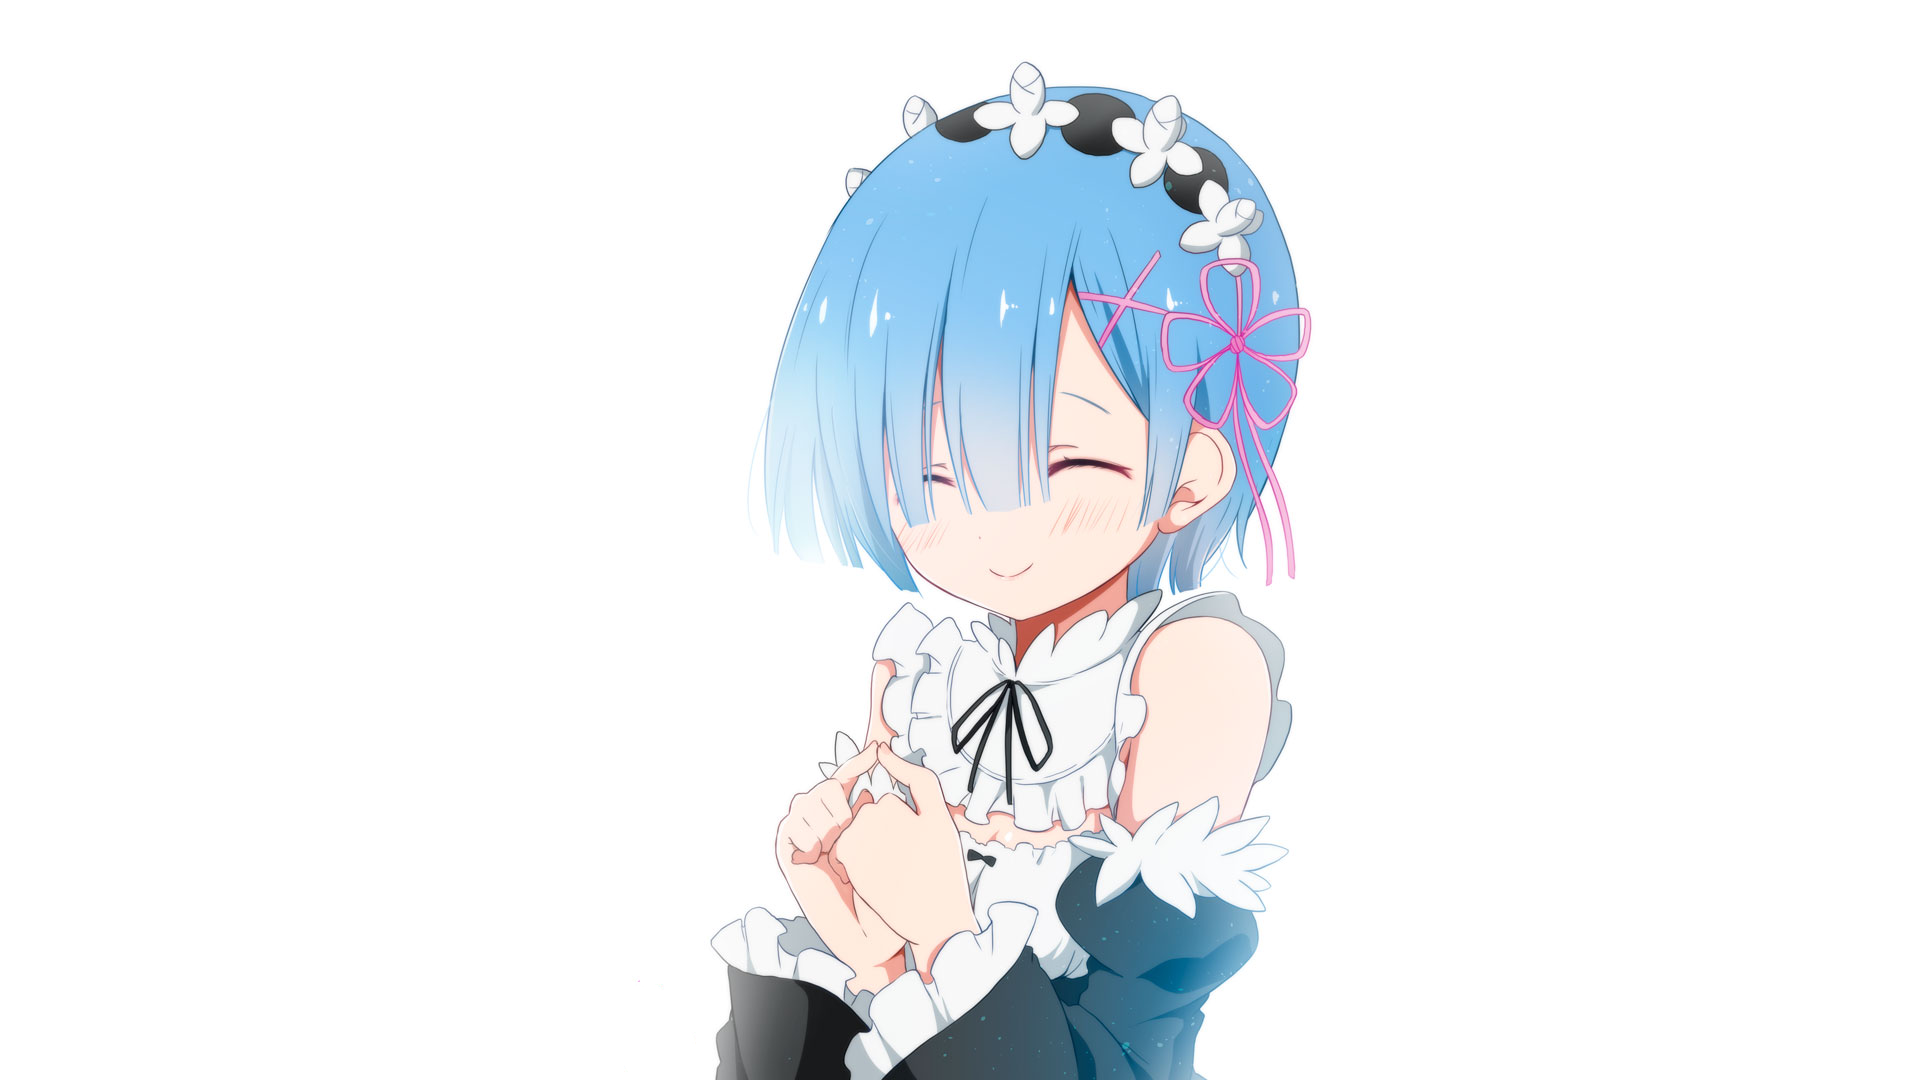 View, download, comment, and rate this 1920x1080 REM Wallpaper